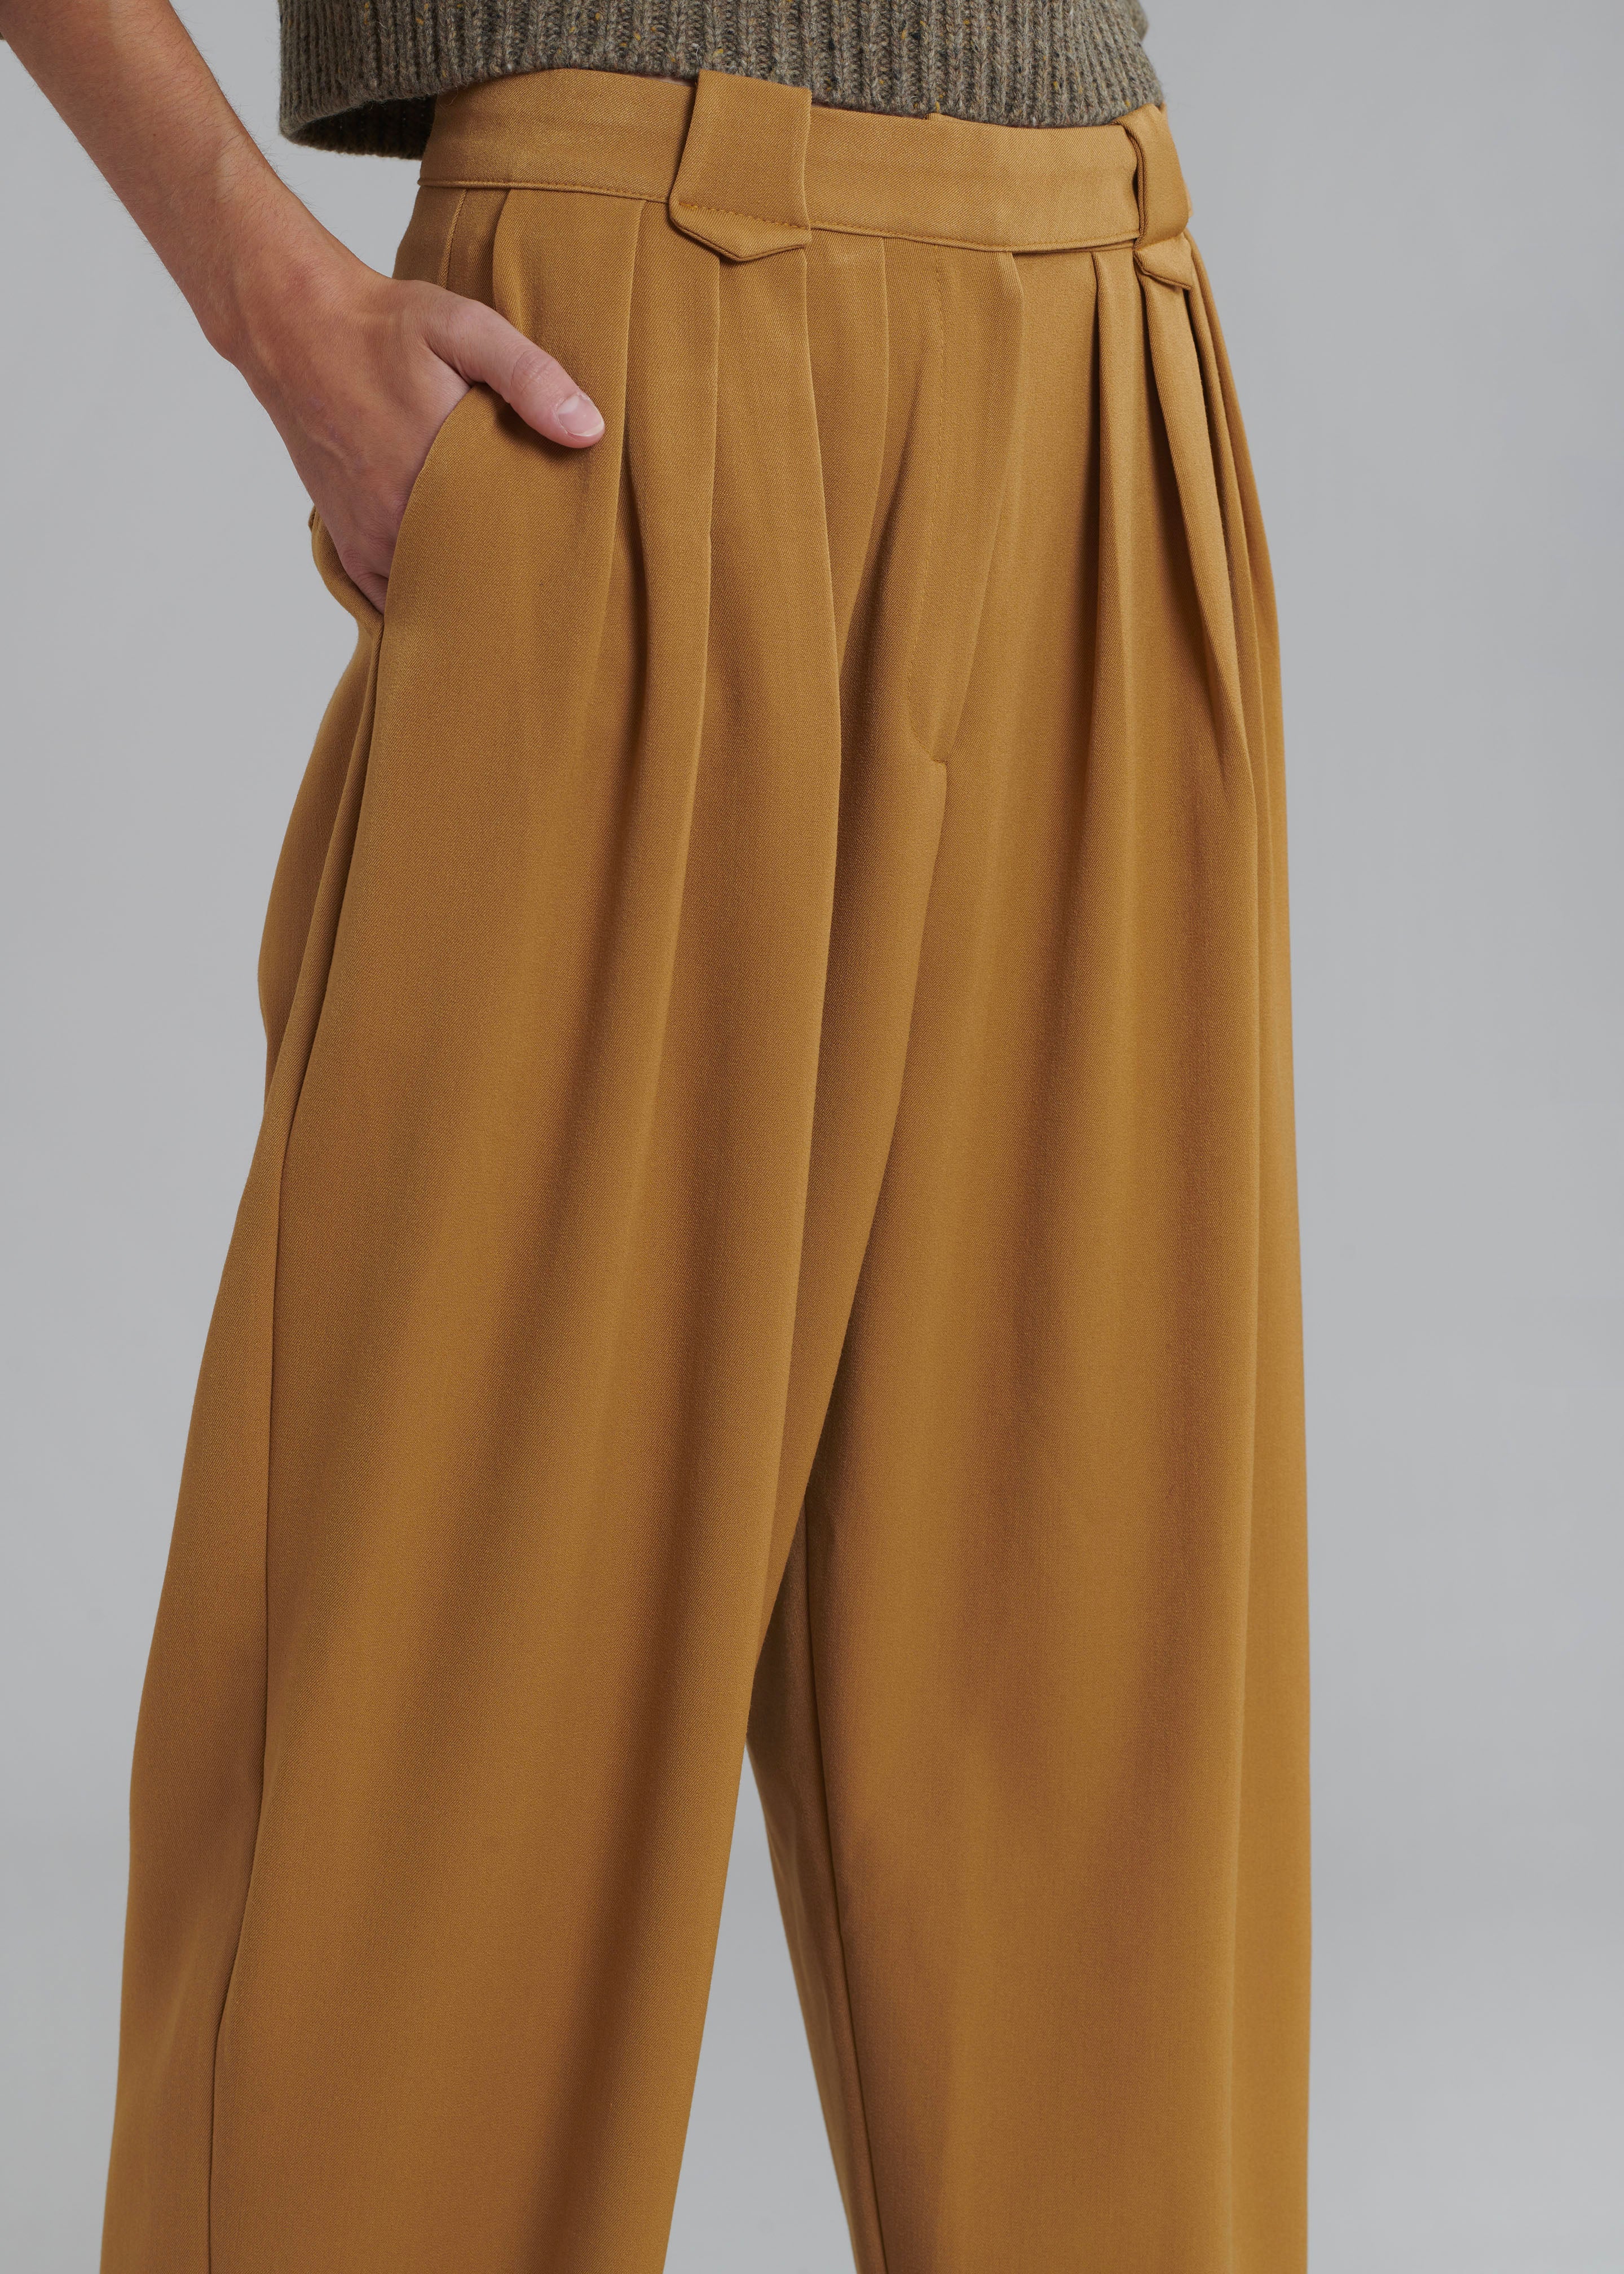 Luce Pleated Pants - Ginger